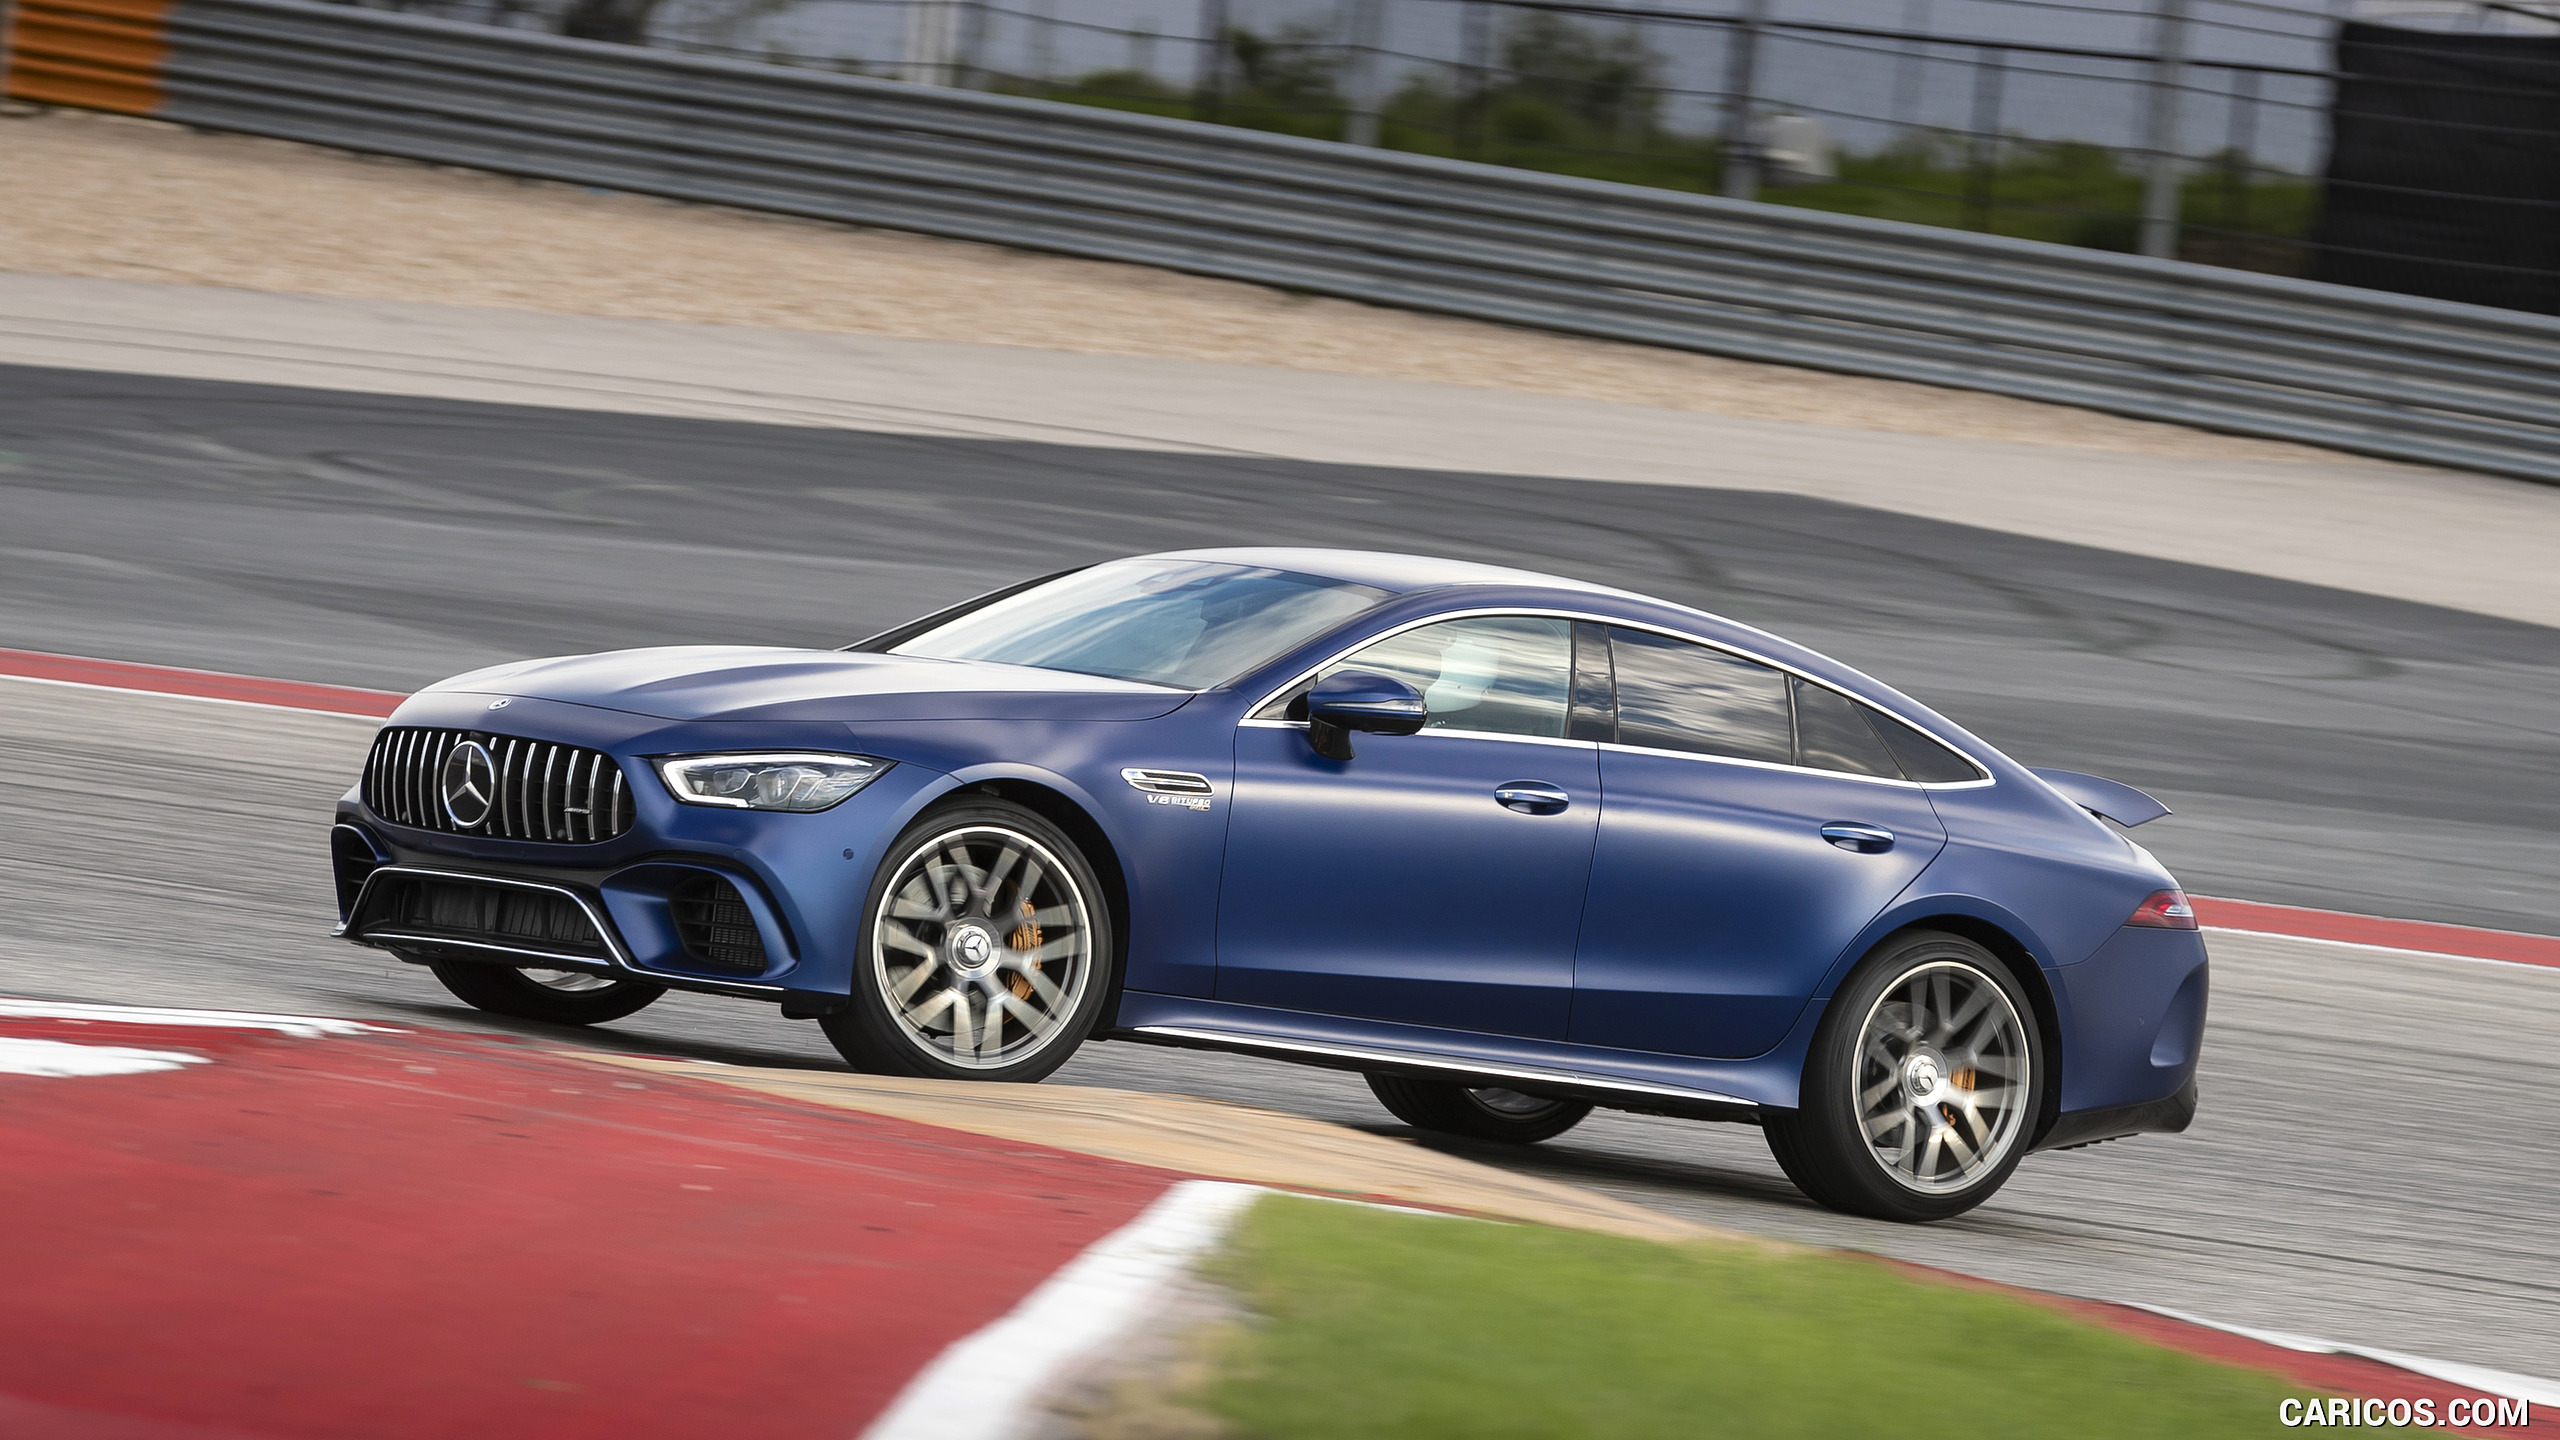 2019 Mercedes-AMG GT 63 S 4MATIC+ 4-Door Coupe - Side, #102 of 427